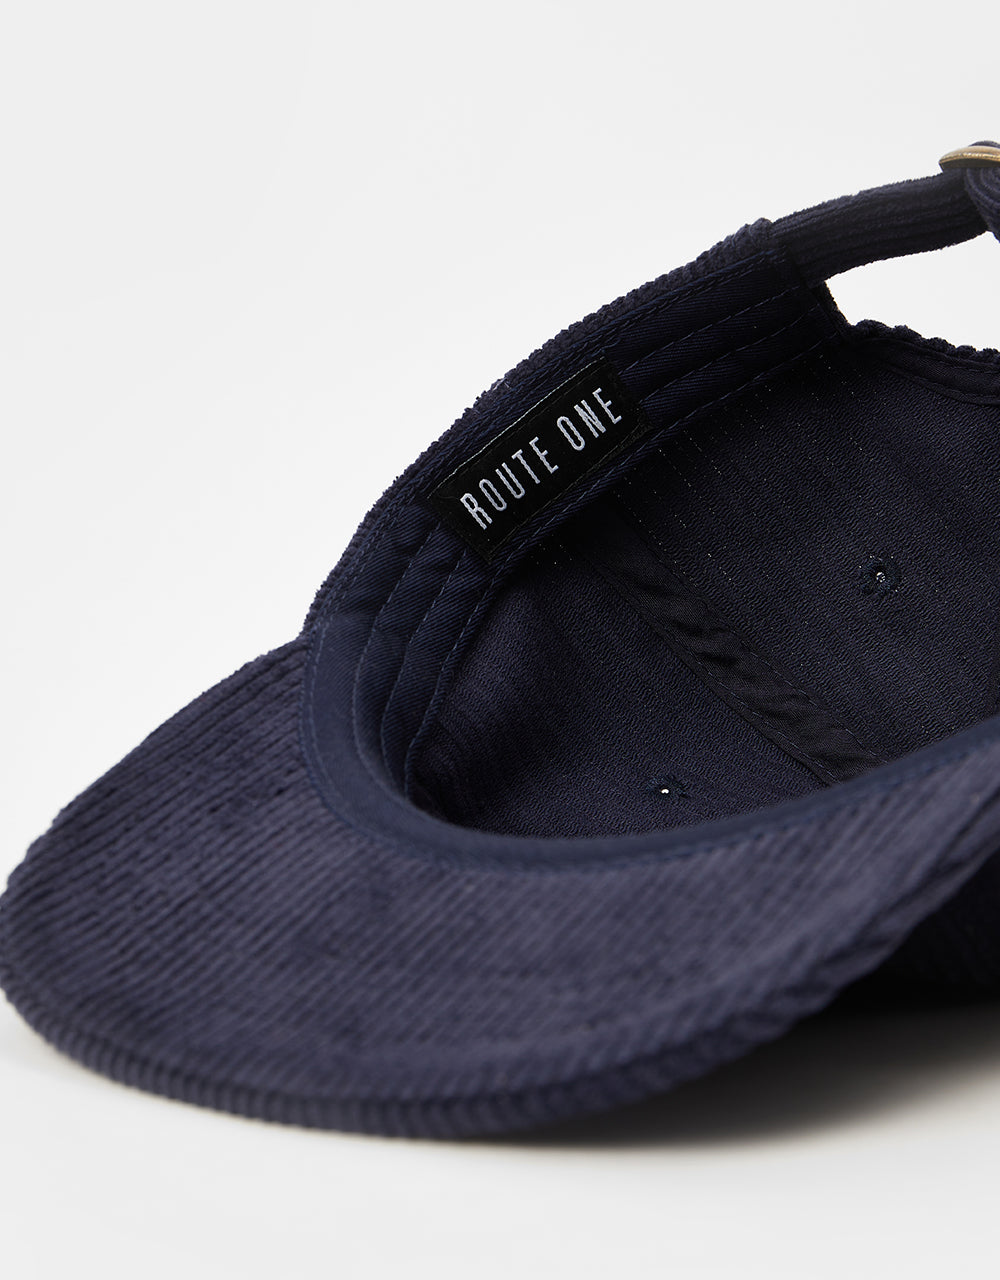 Route One Unstructured Cord 6 Panel Cap - Navy